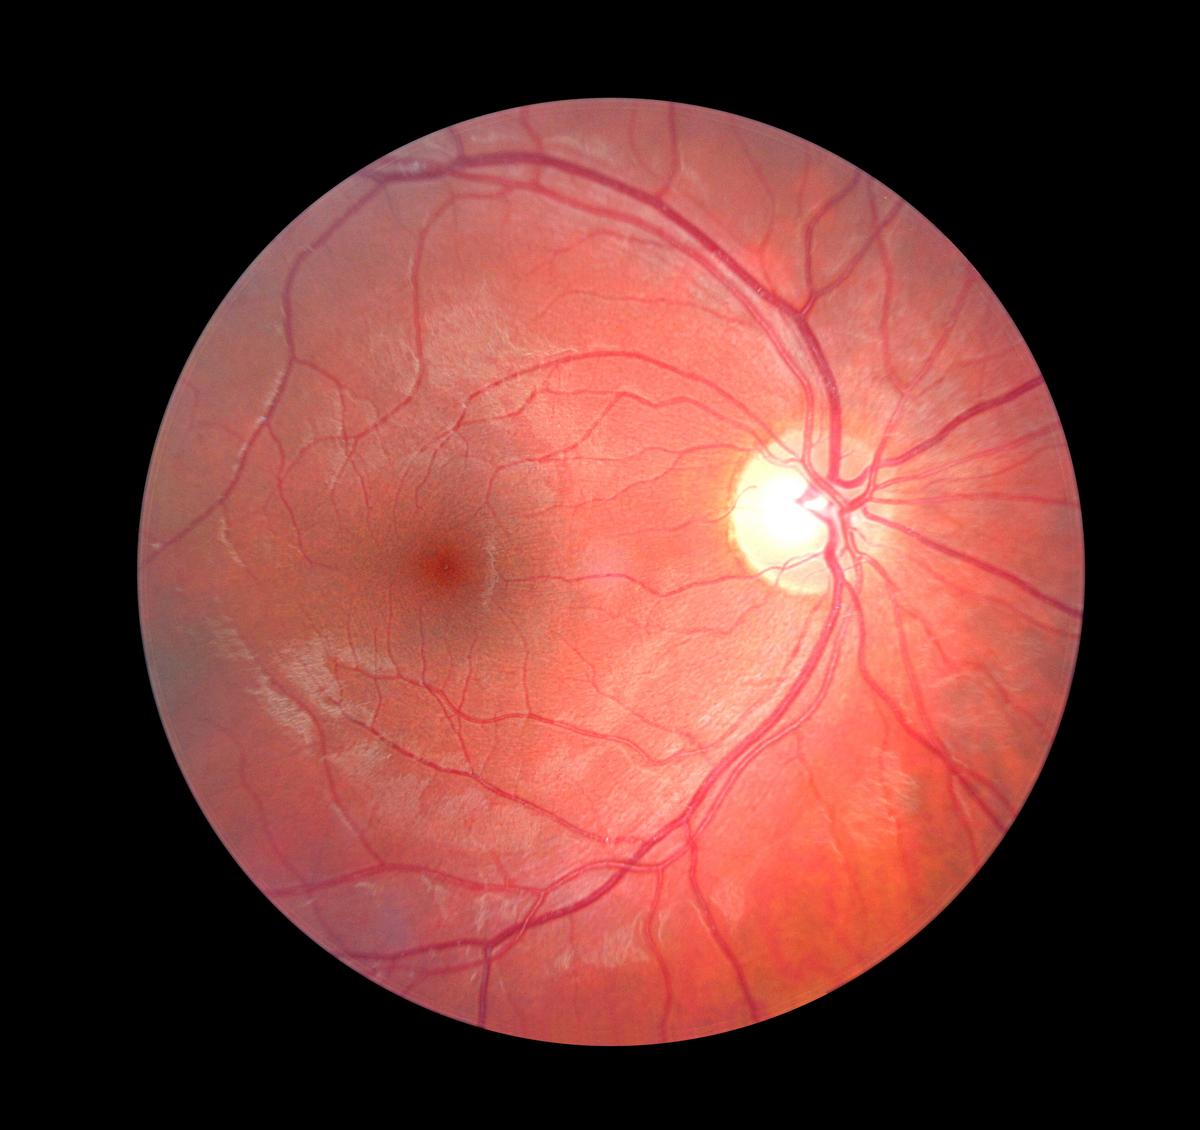 Retinal thinning could provide early sign of Parkinson